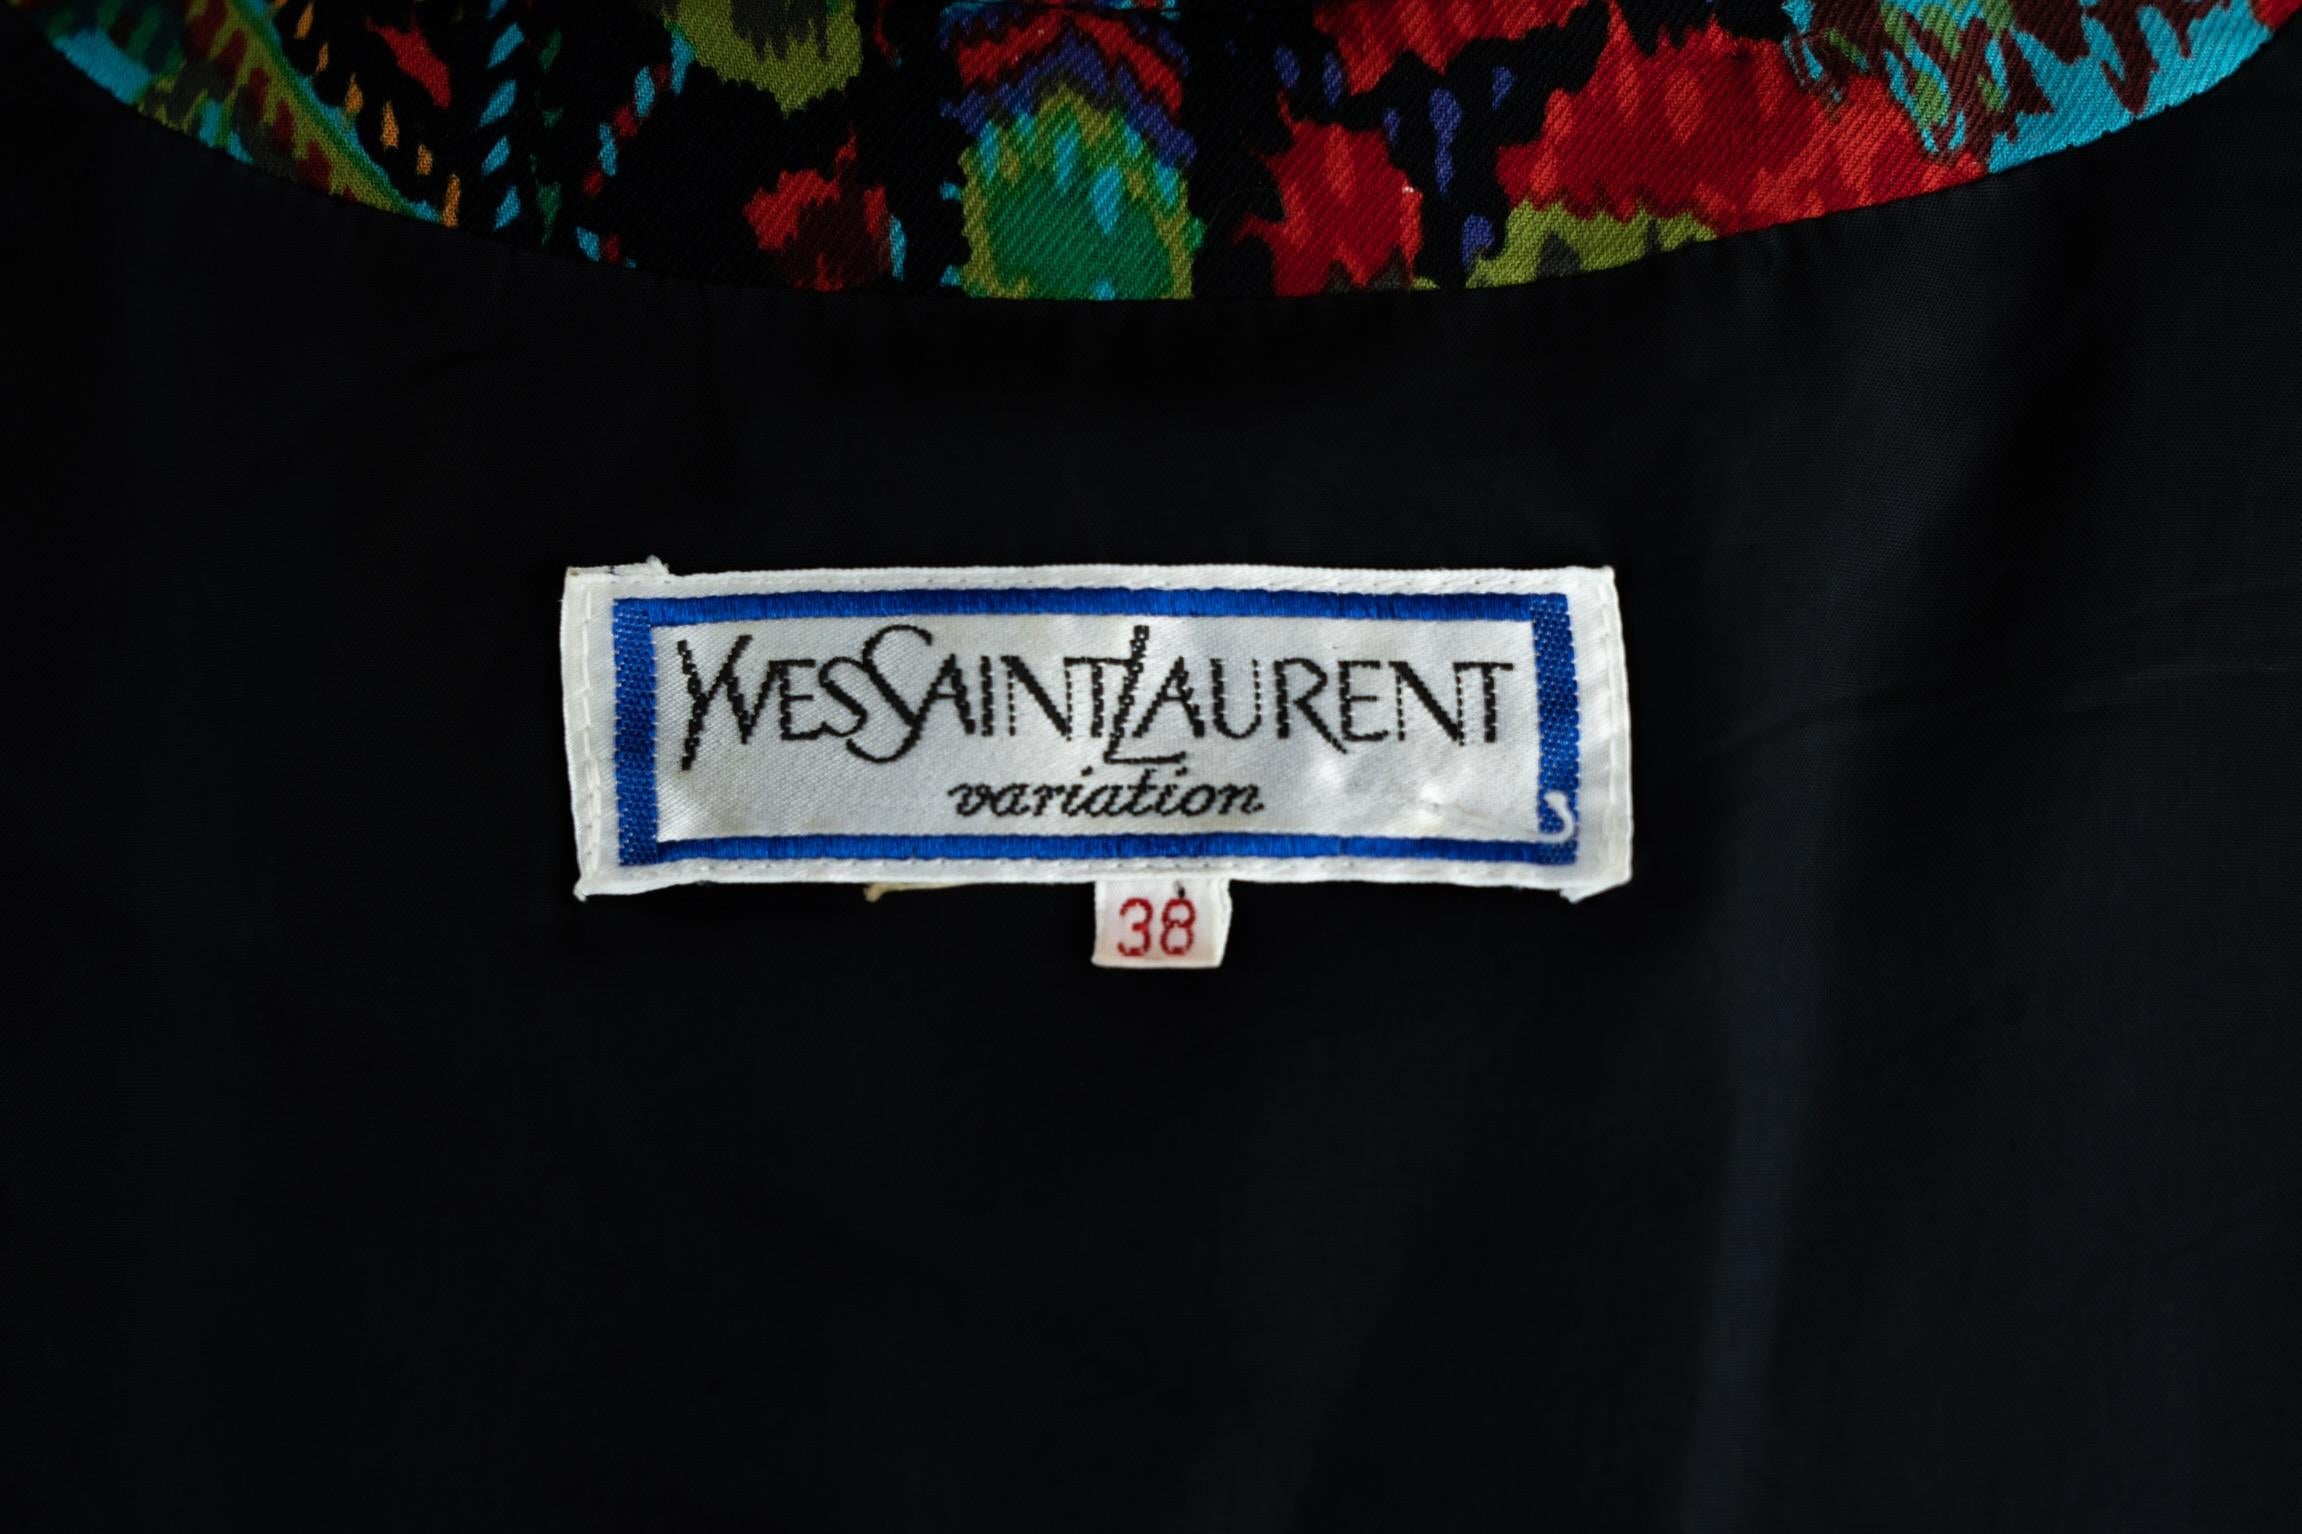 Black Yves Saint Laurent Russian paisley floral jacket. Early 70s.